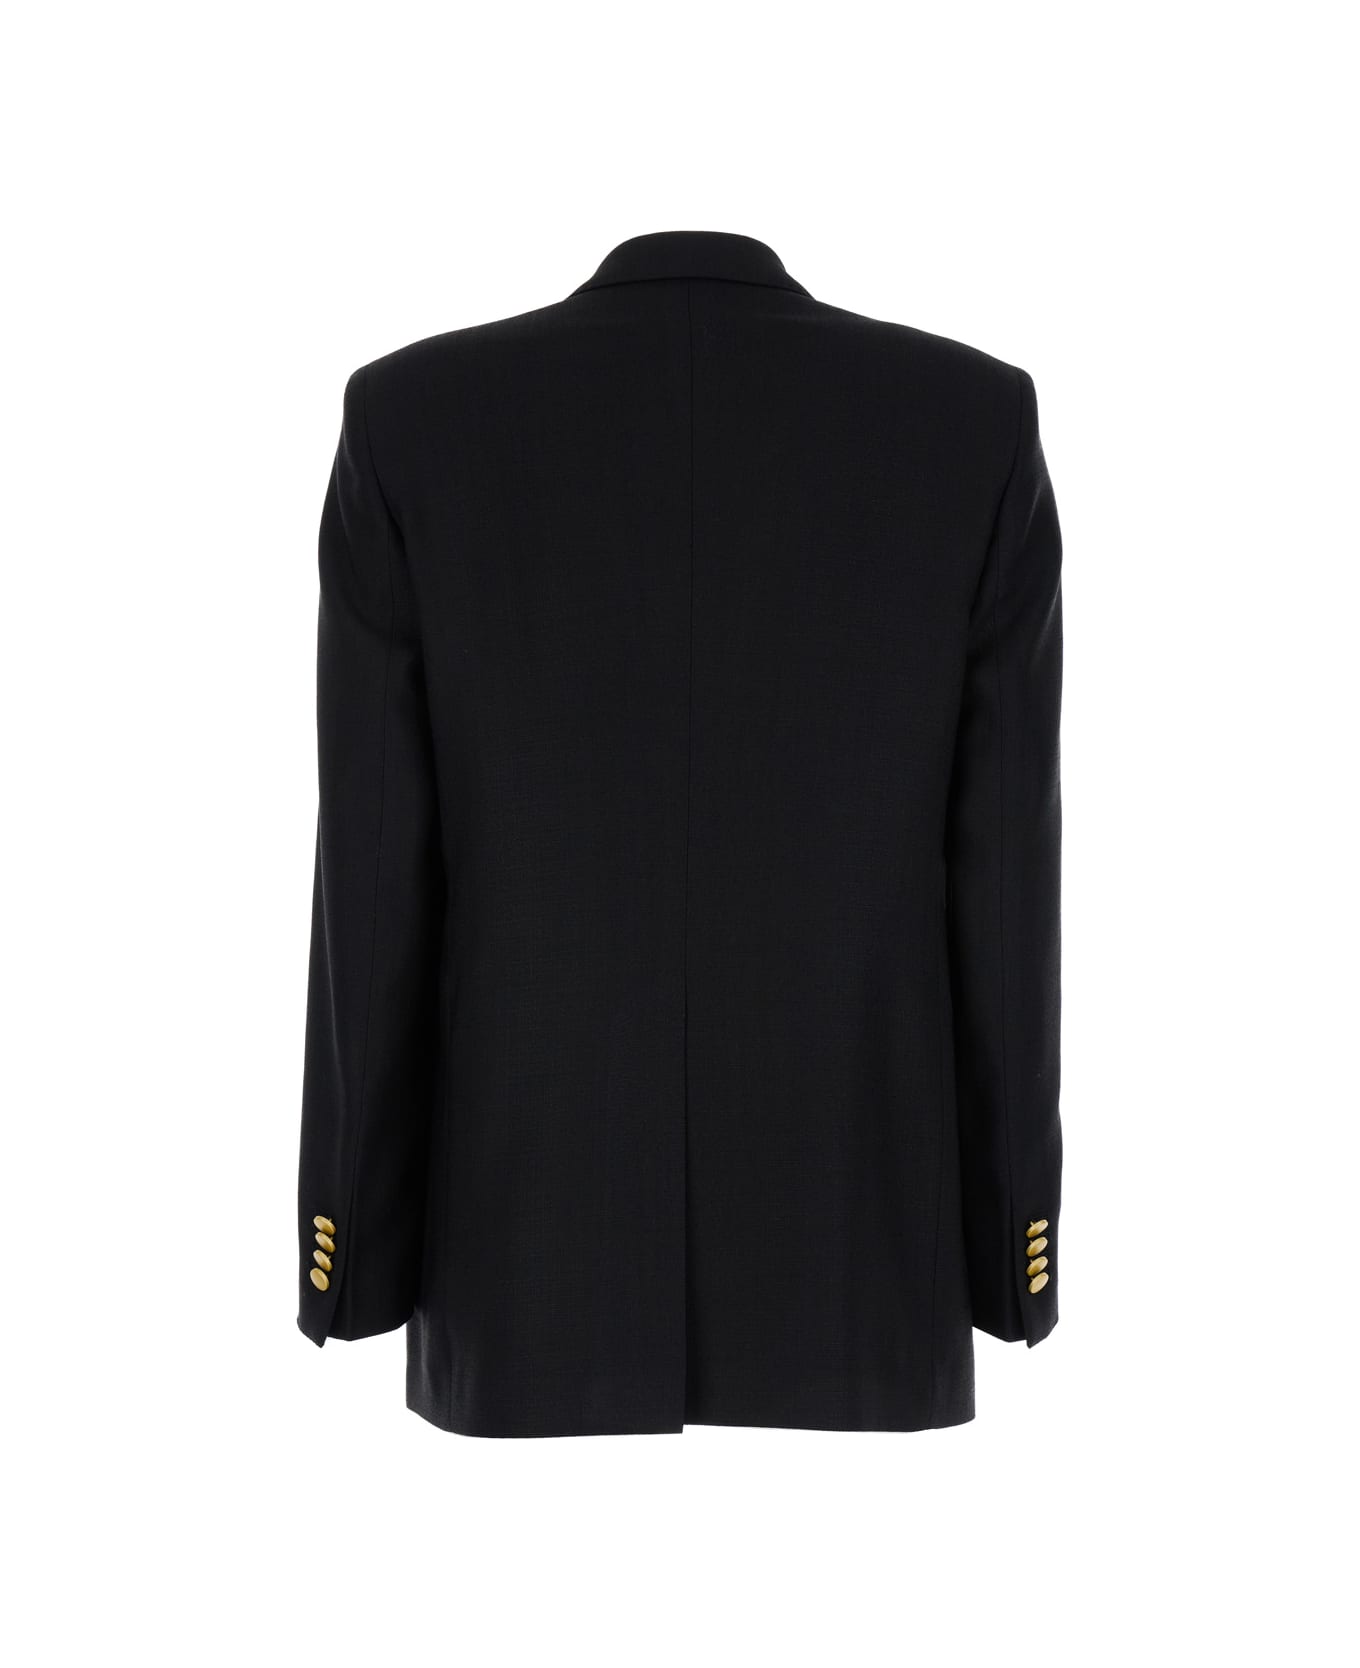 Tagliatore Black Double-breasted Blazer With Gold-tone Buttons In Viscose Blend Woman - Black